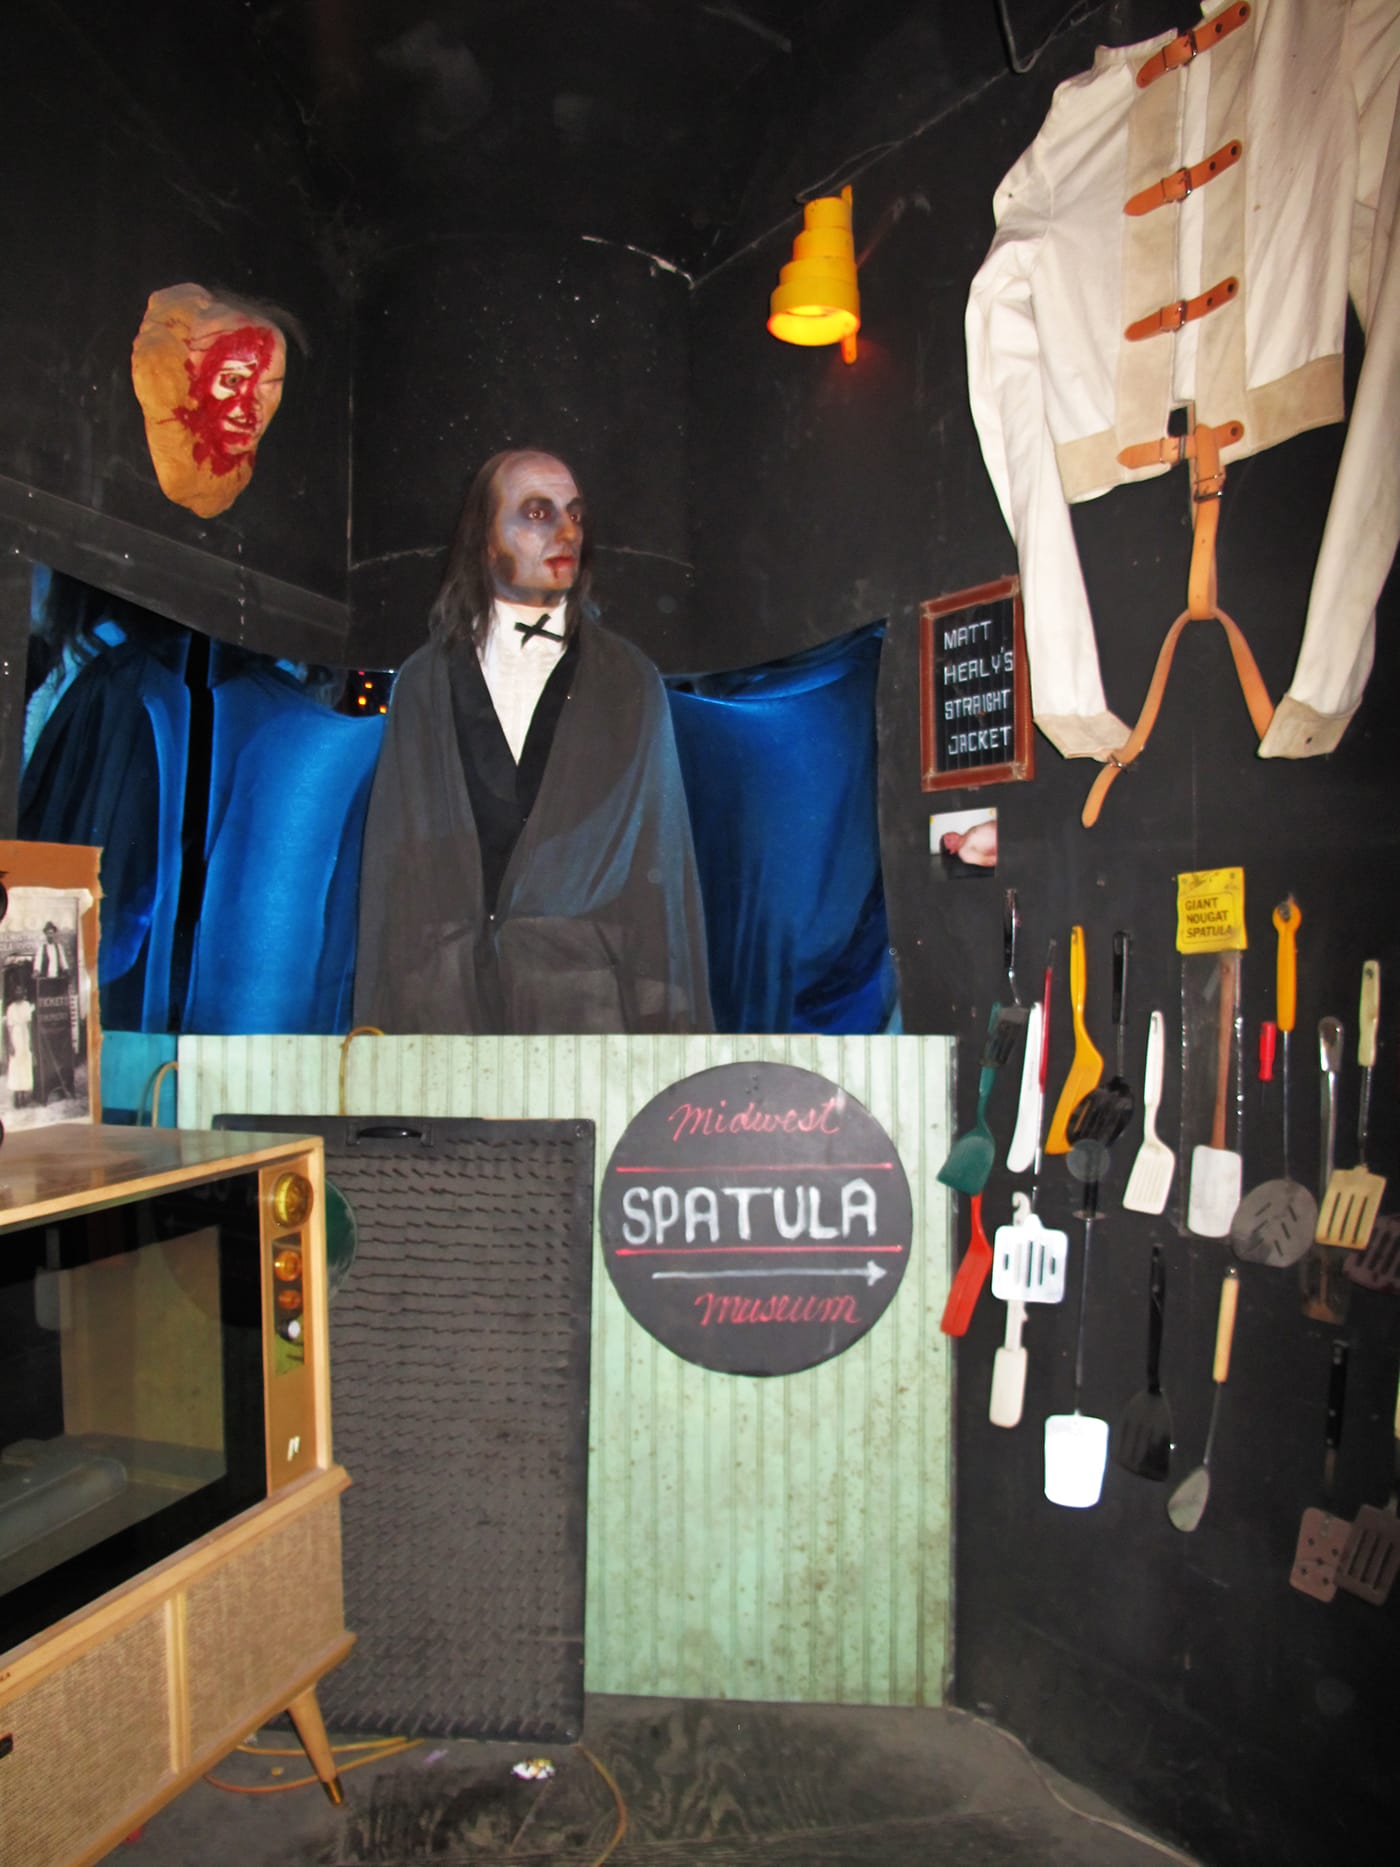 Midwest Spatula Museum in the City Museum's Museum of Mirth, Mystery and Mayhem in St. Louis, Missouri.